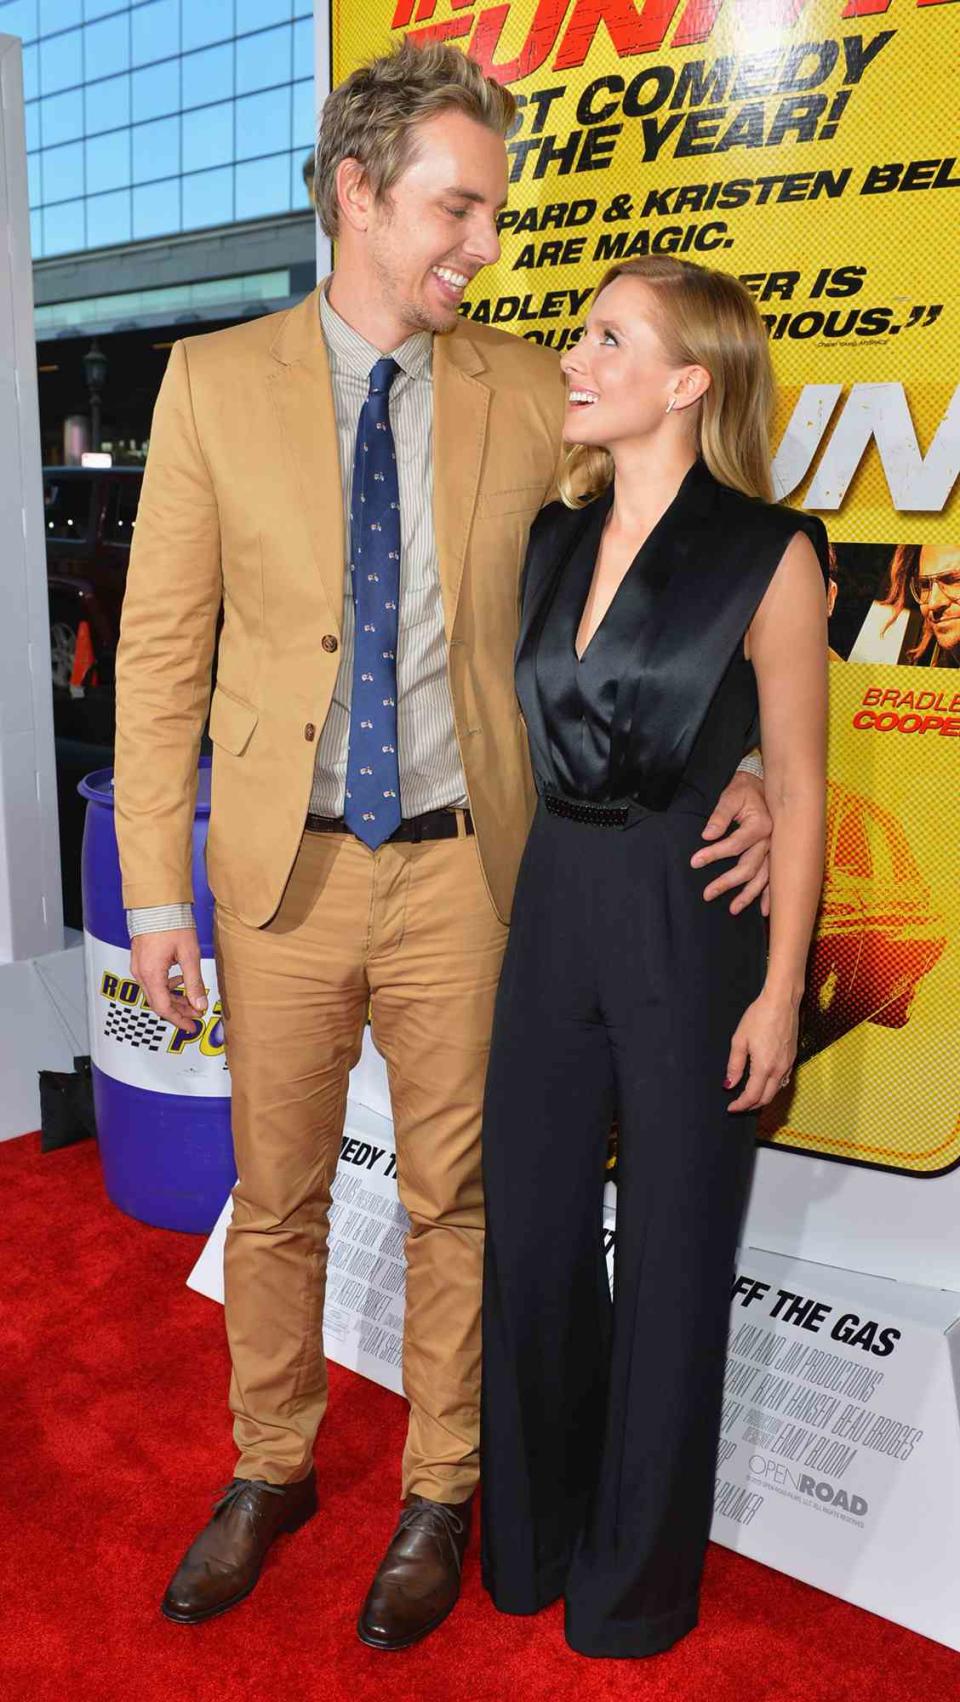 Actors Dax Shepard and Kristen Bell arrive to the premiere of Open Road Films' "Hit and Run" on August 14, 2012 in Los Angeles, California